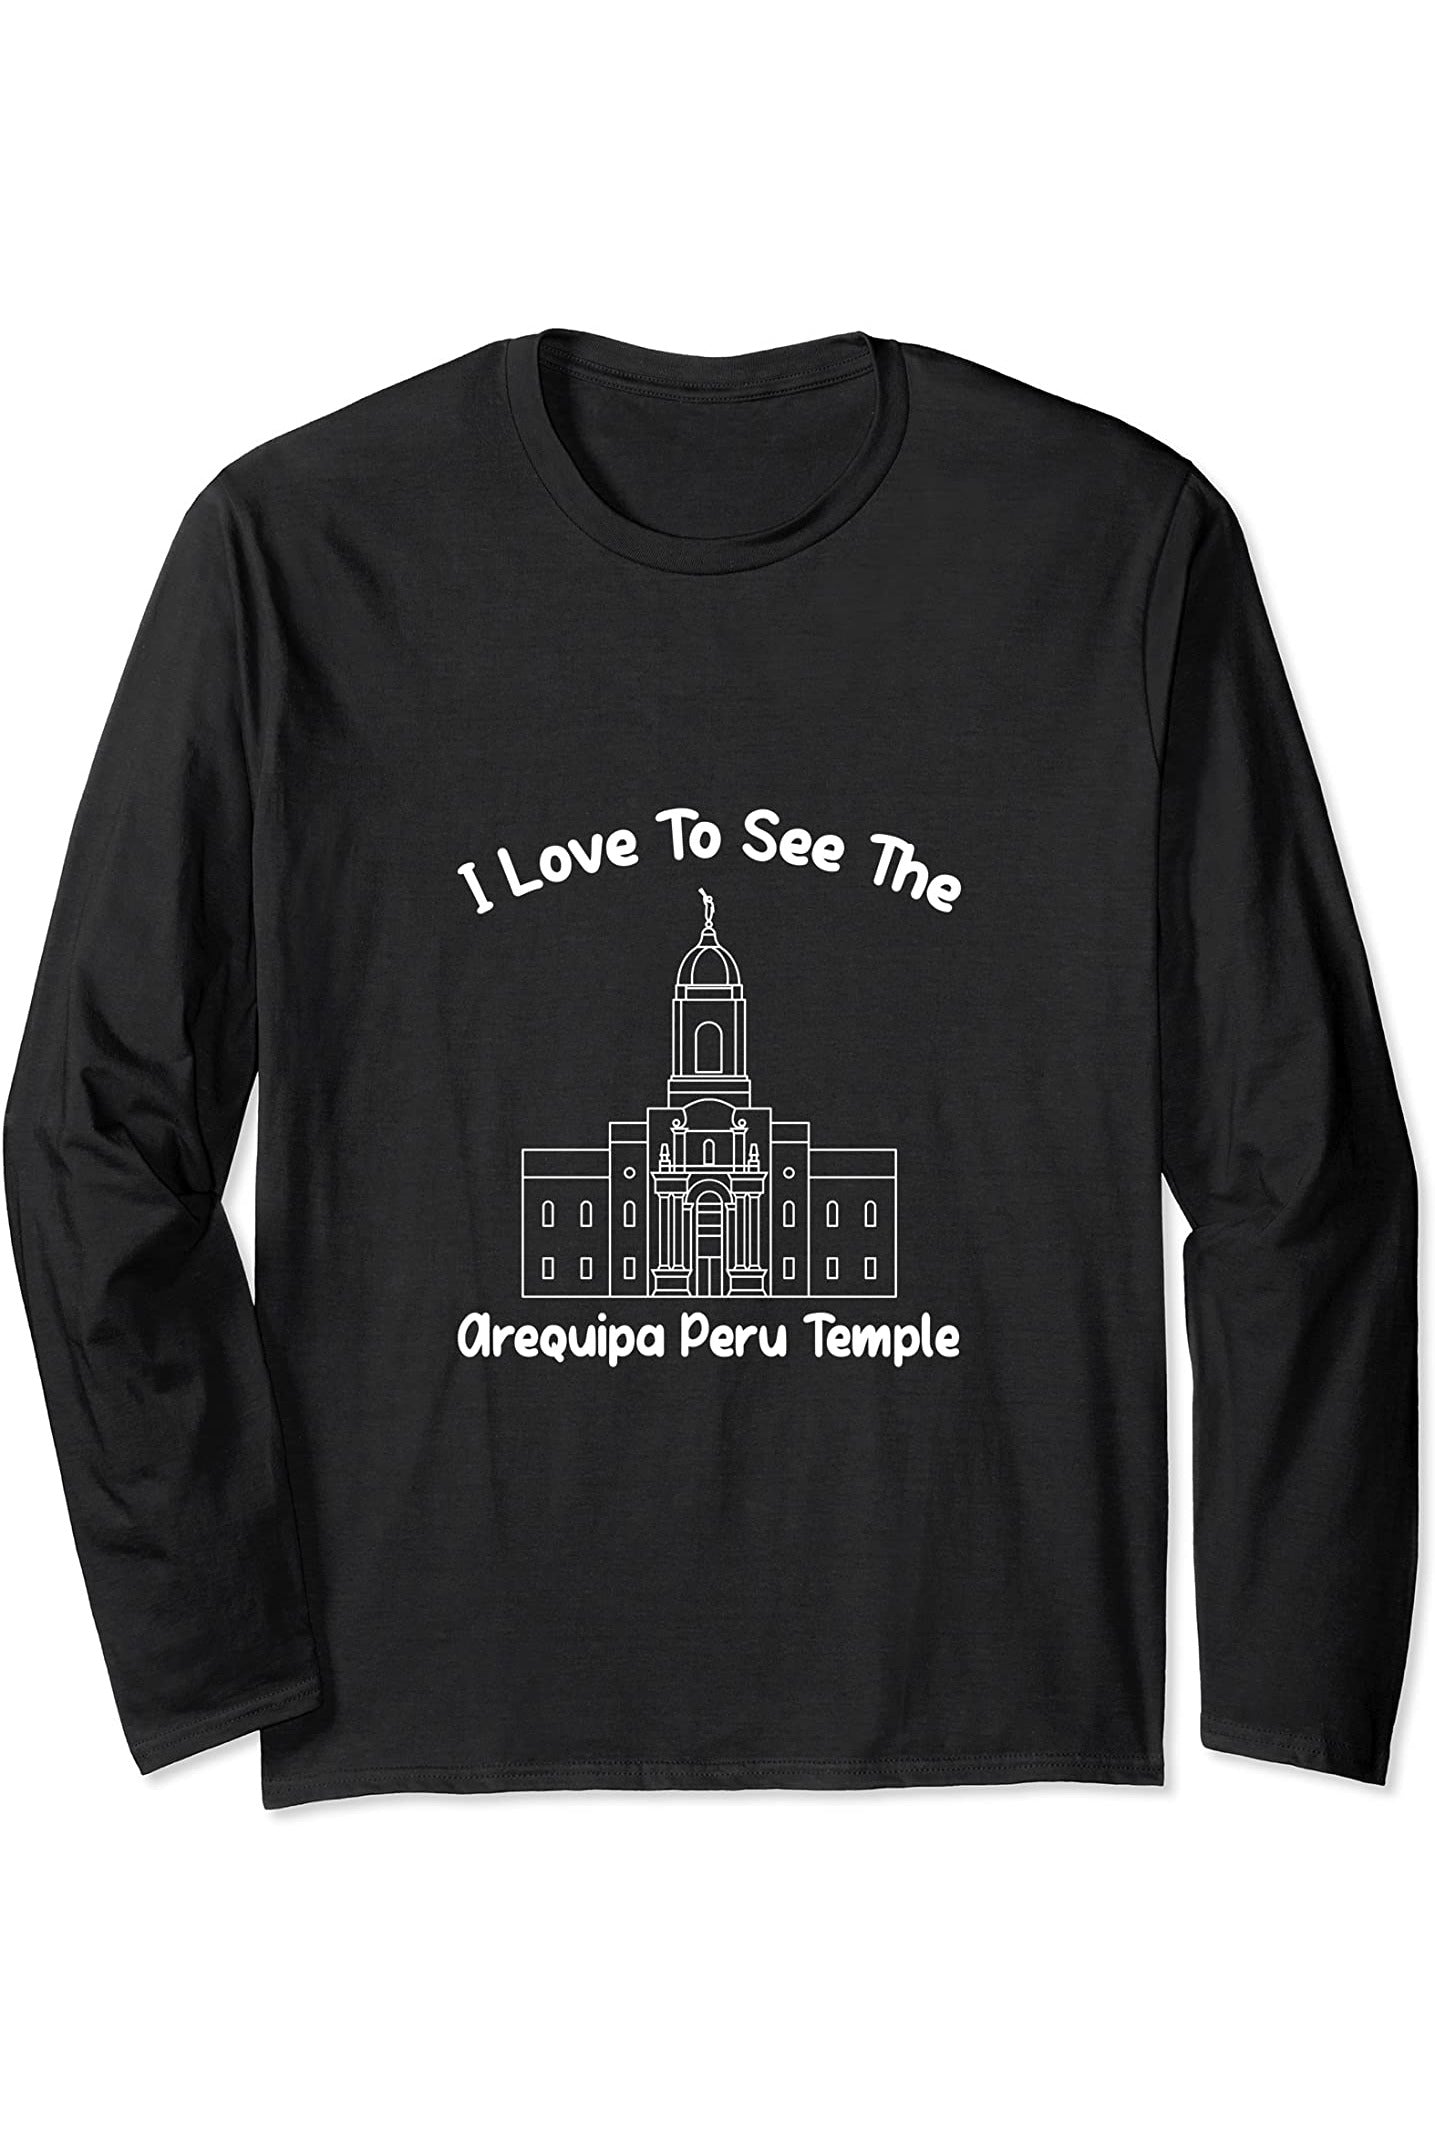 Arequipa Peru Temple Long Sleeve T-Shirt - Primary Style (English) US